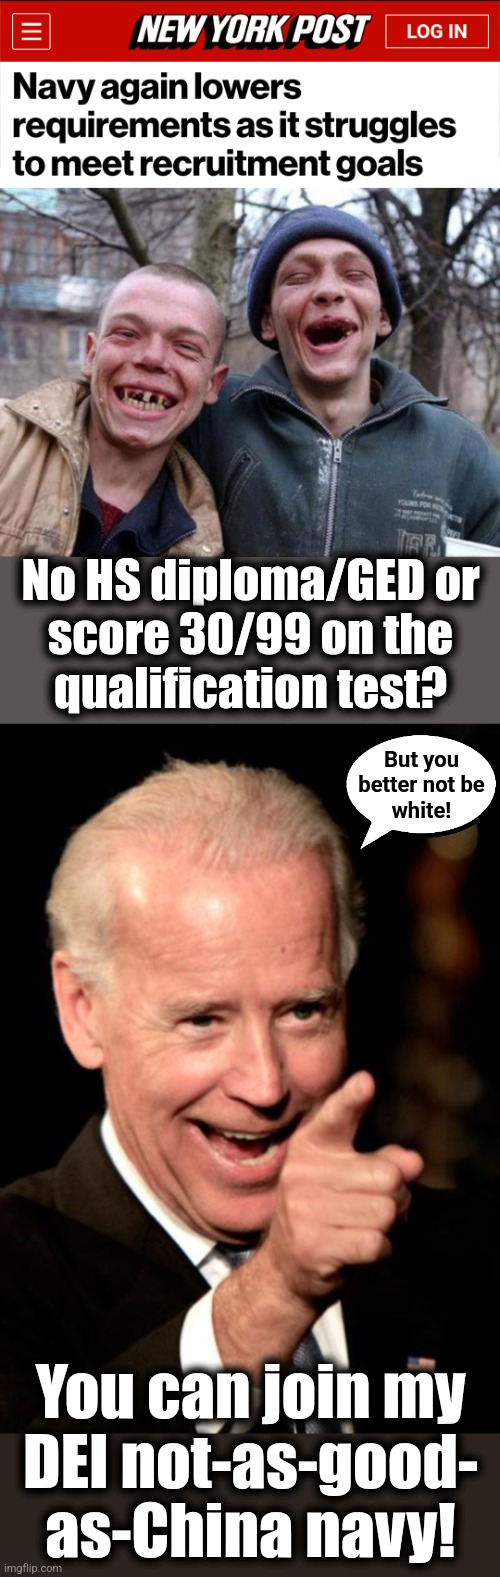 No HS diploma/GED or
score 30/99 on the
qualification test? But you
better not be
white! You can join my
DEI not-as-good-
as-China navy! | image tagged in memes,smilin biden,navy,diversity,dei,recruiting | made w/ Imgflip meme maker